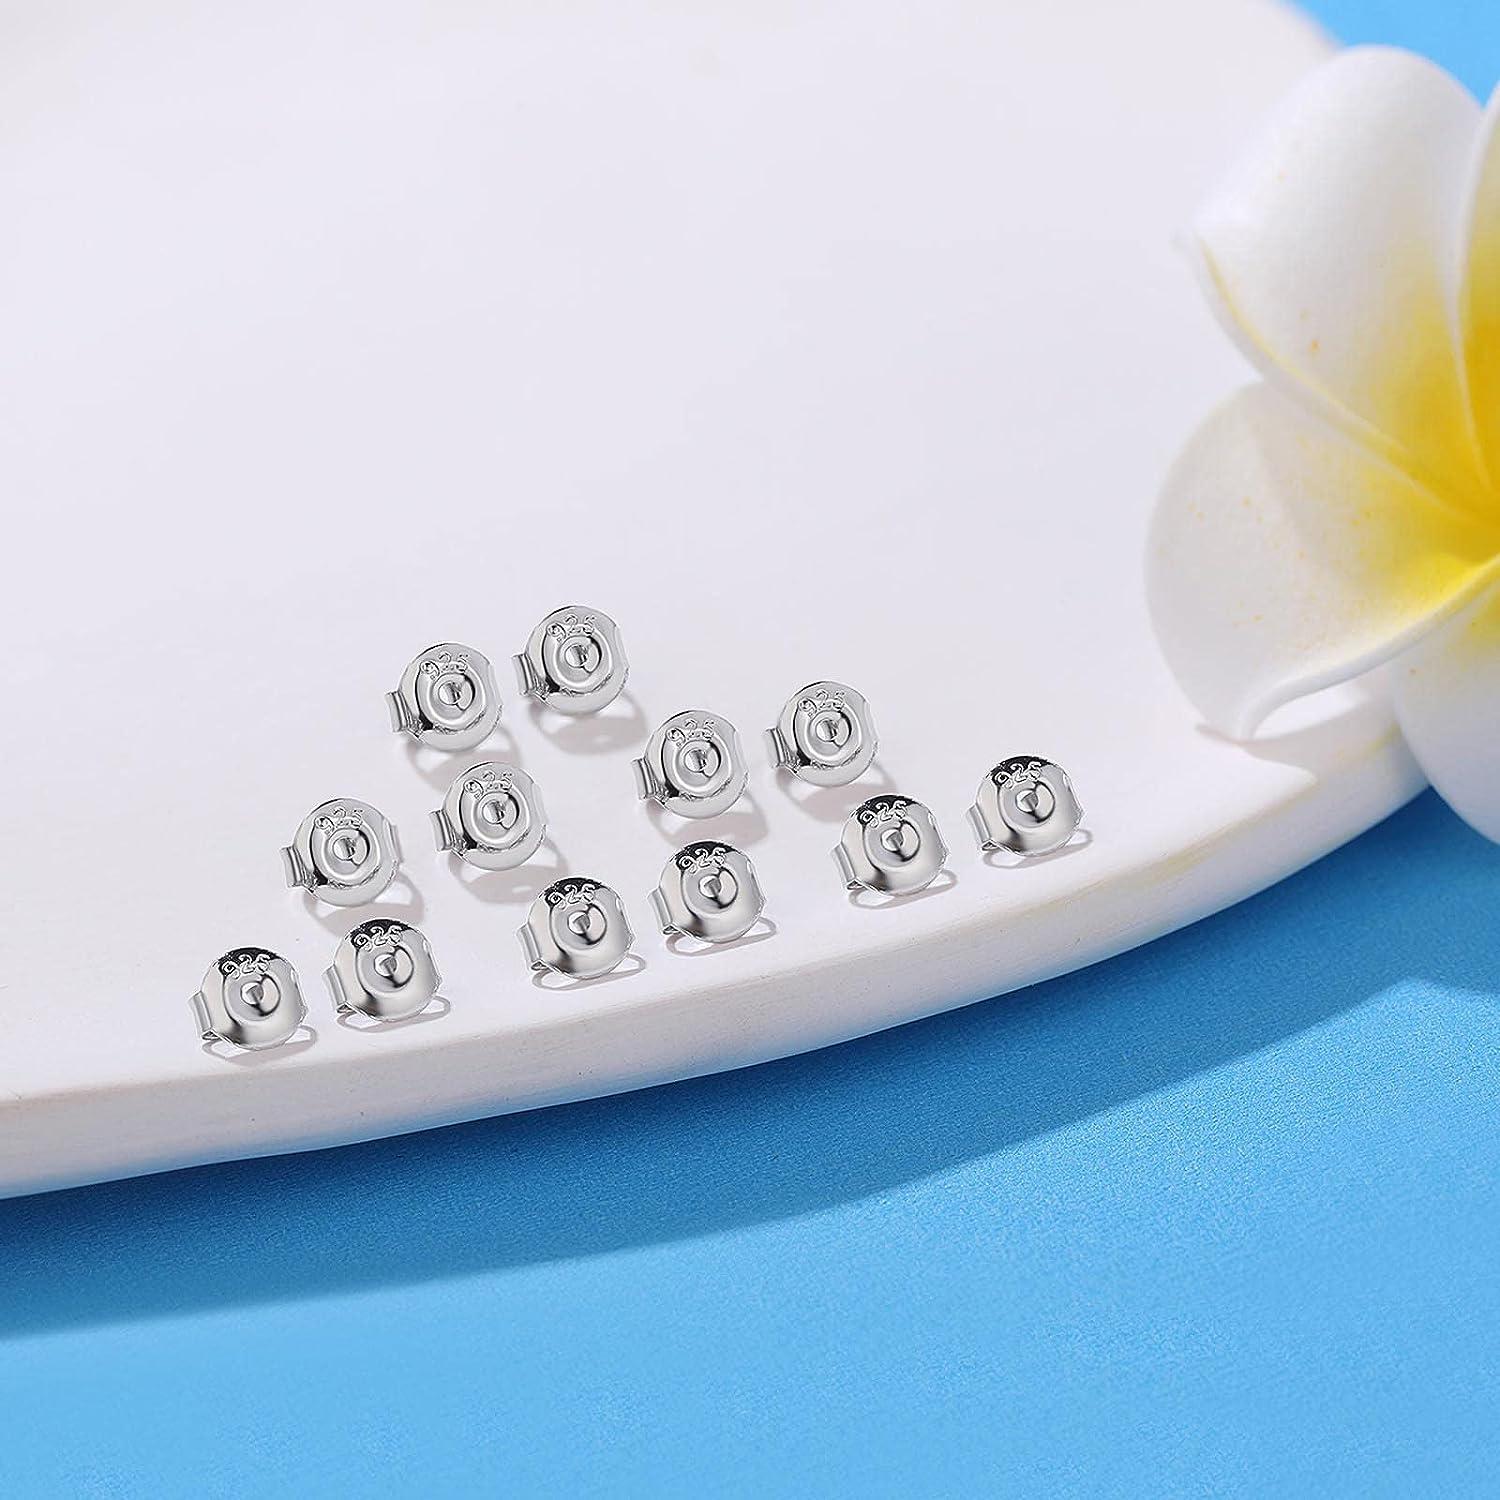 Earring Backs for Studs, Moconar 12PCS 925 Sterling Silver Earring Backs  Replacements, Hypoallergenic Earring Backs Secure Ear Locking Pierced  Earring Backs for Studs